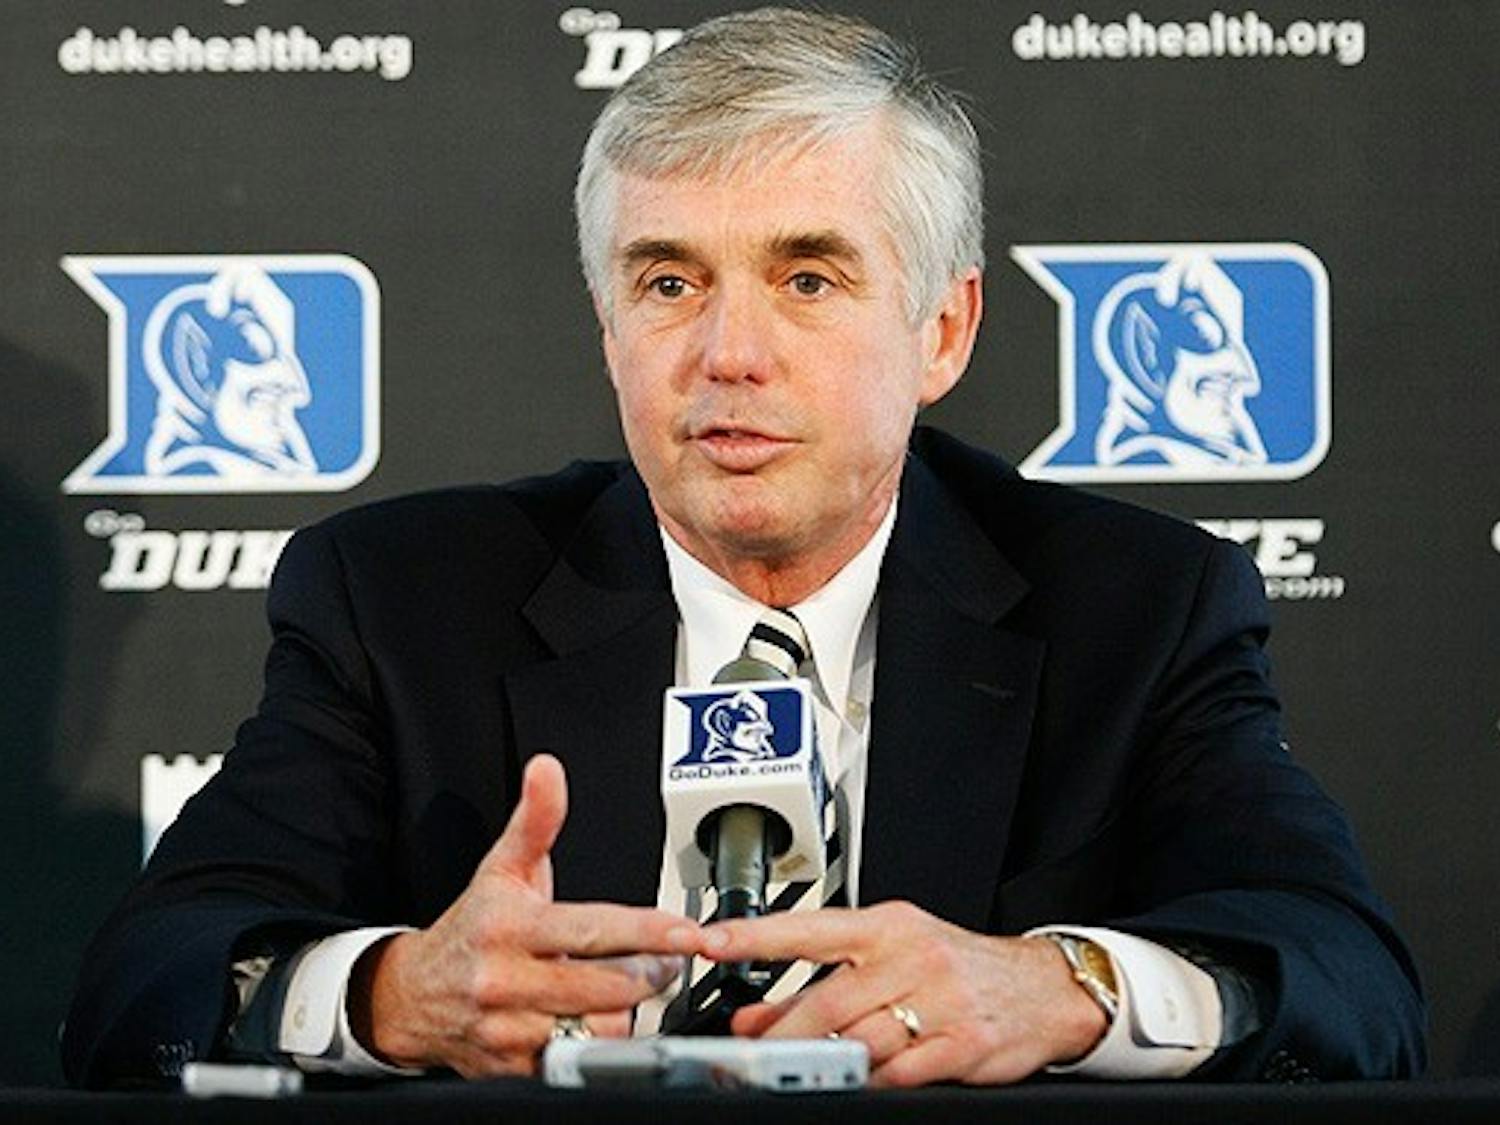 White has served as Duke's director of athletics since 2008.